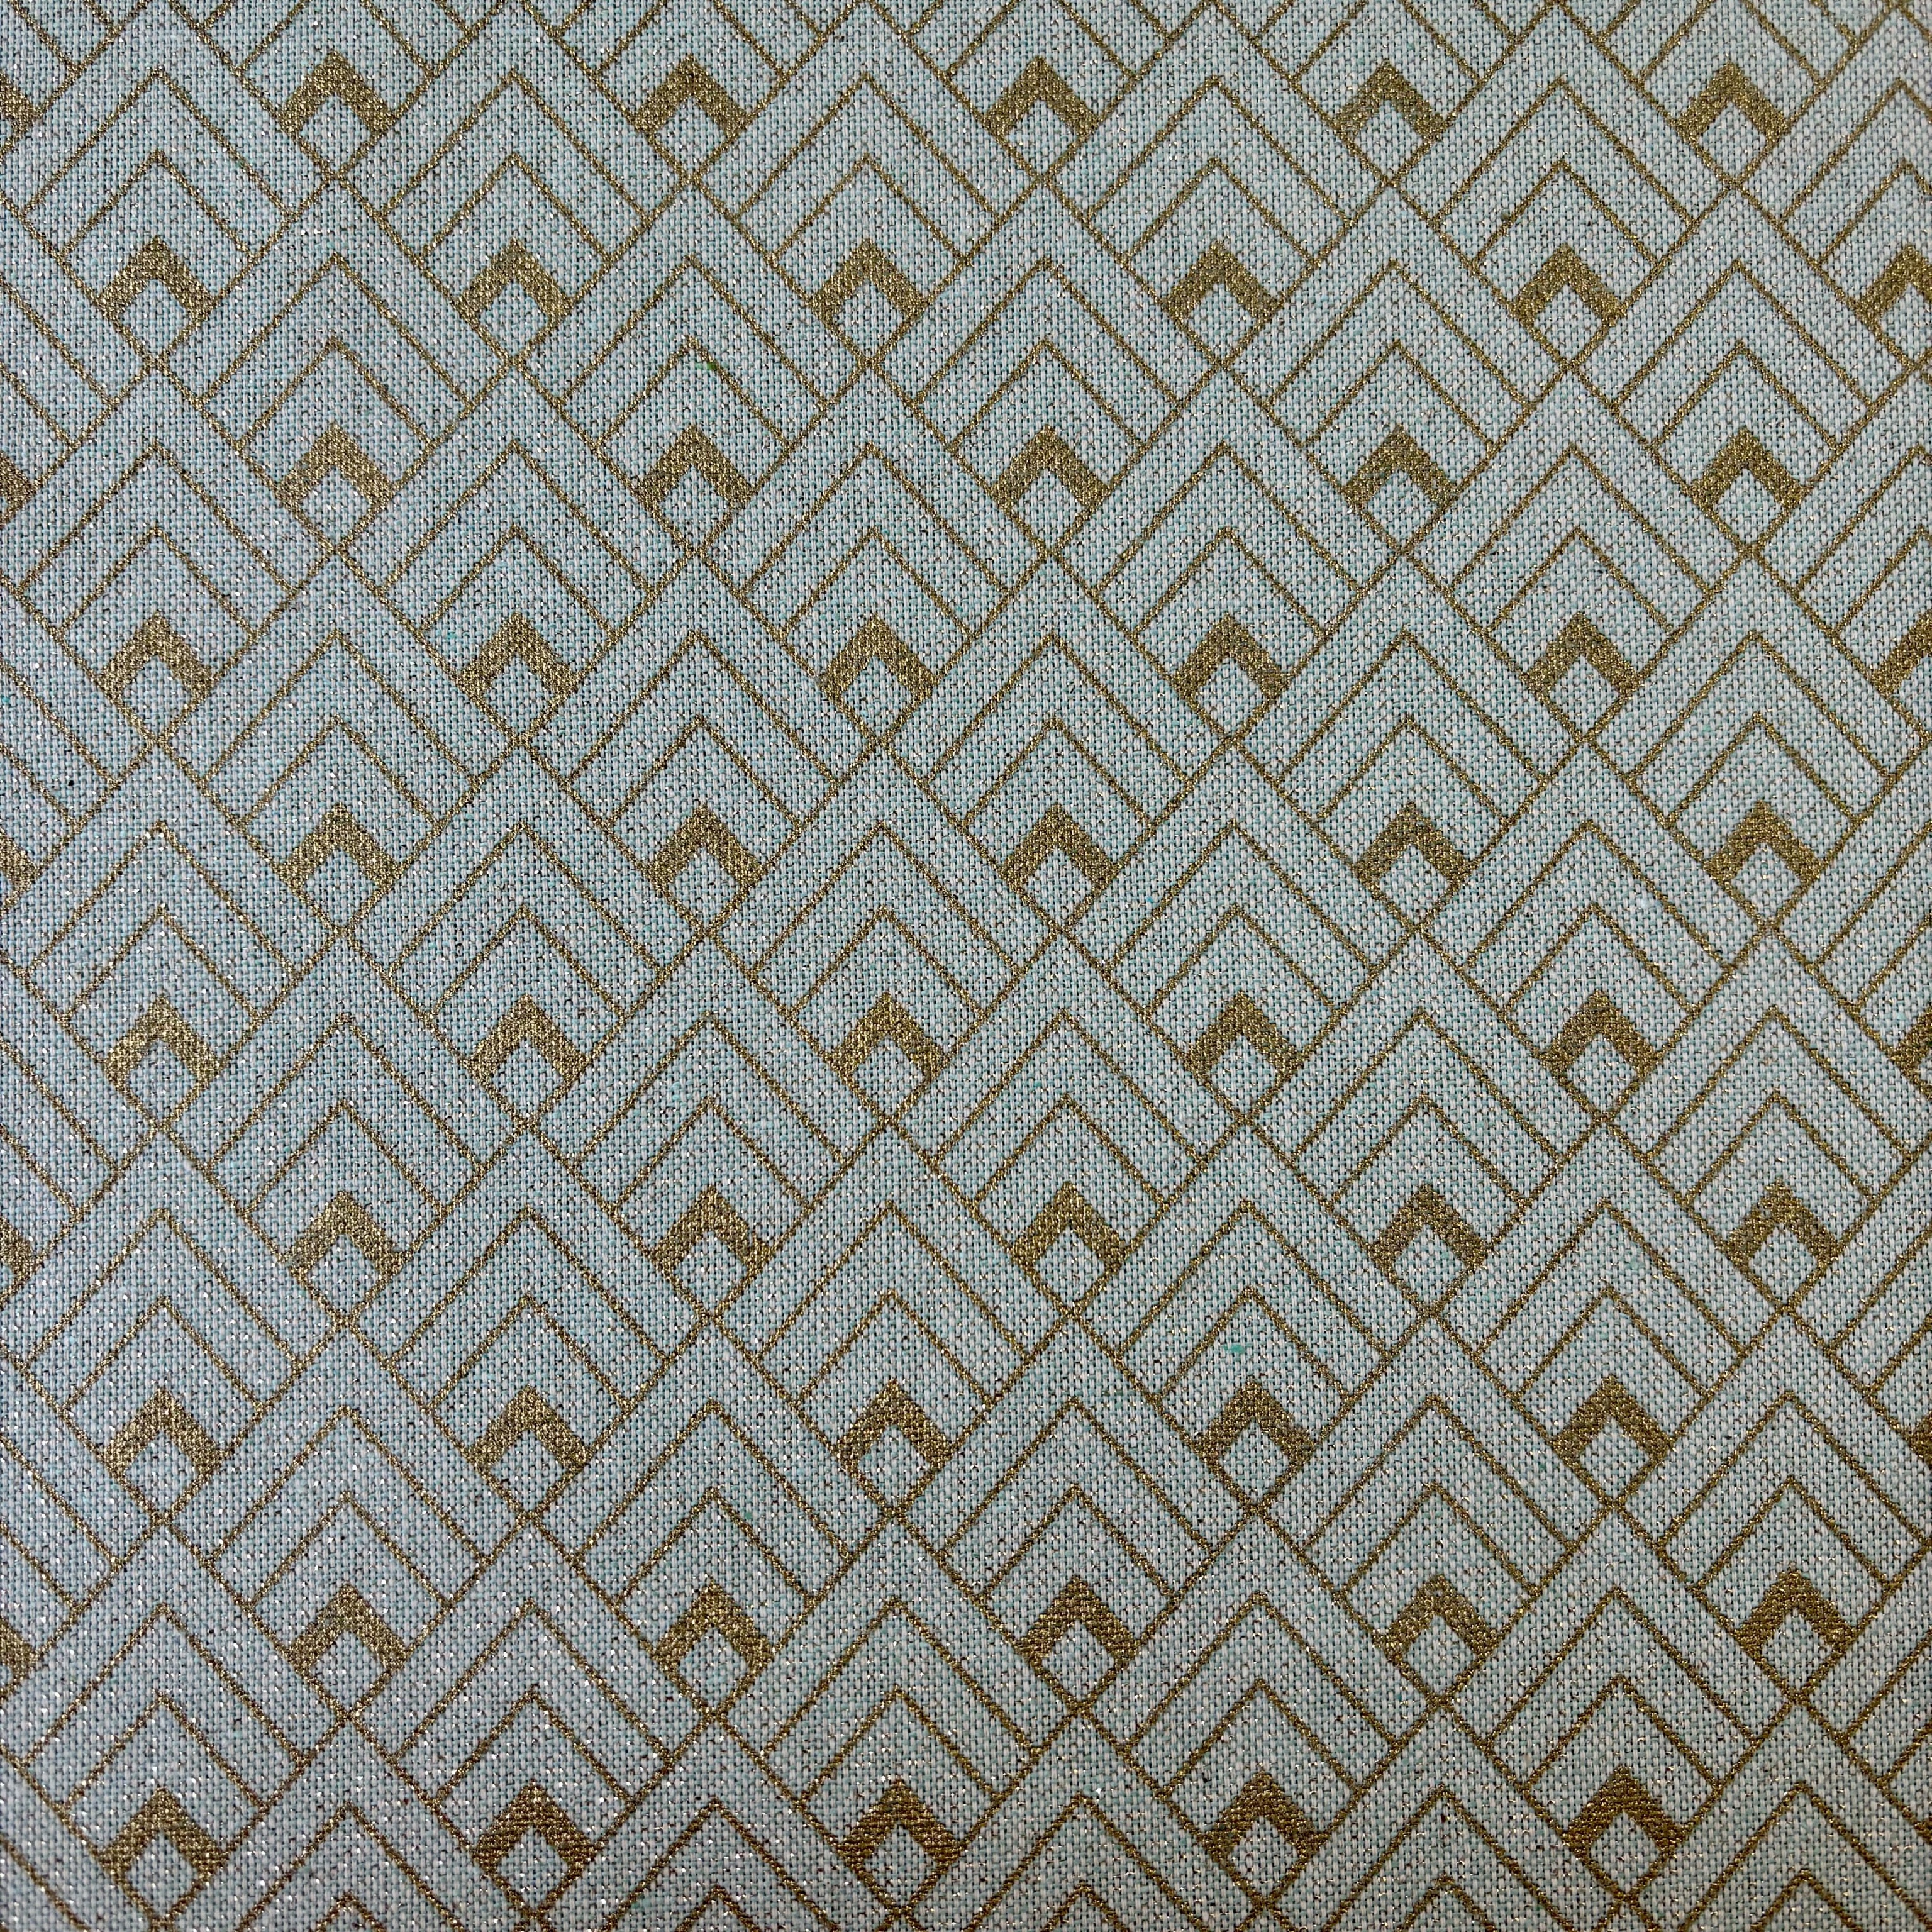 Canvas mint gold geometrisches Muster